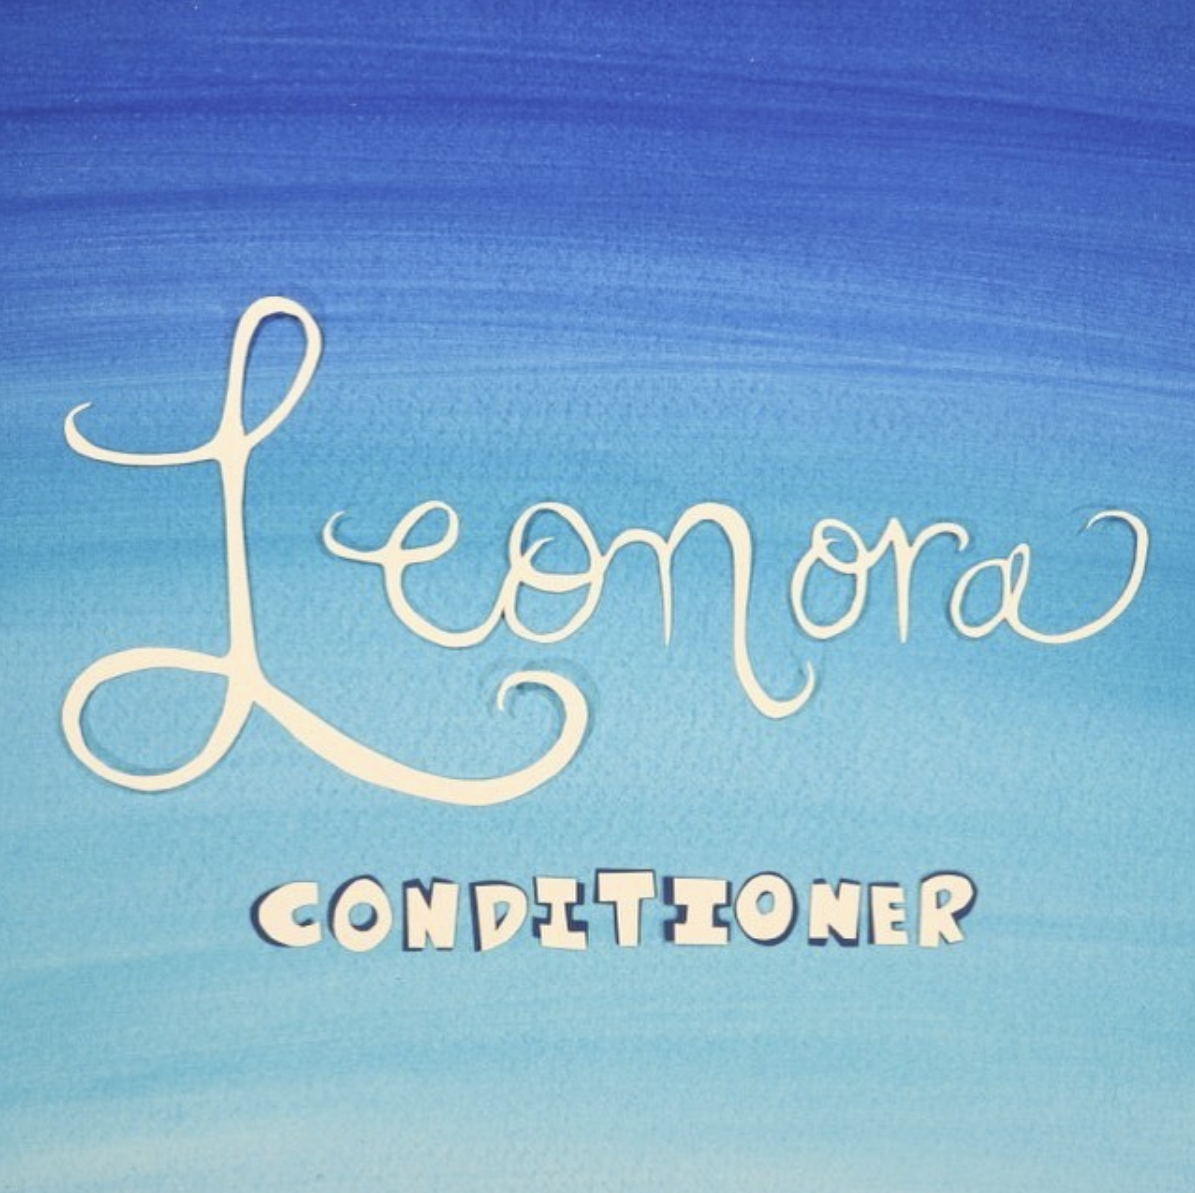 Indie Band Conditioner Muse on Surrealist Artist in New Single “Leonora”